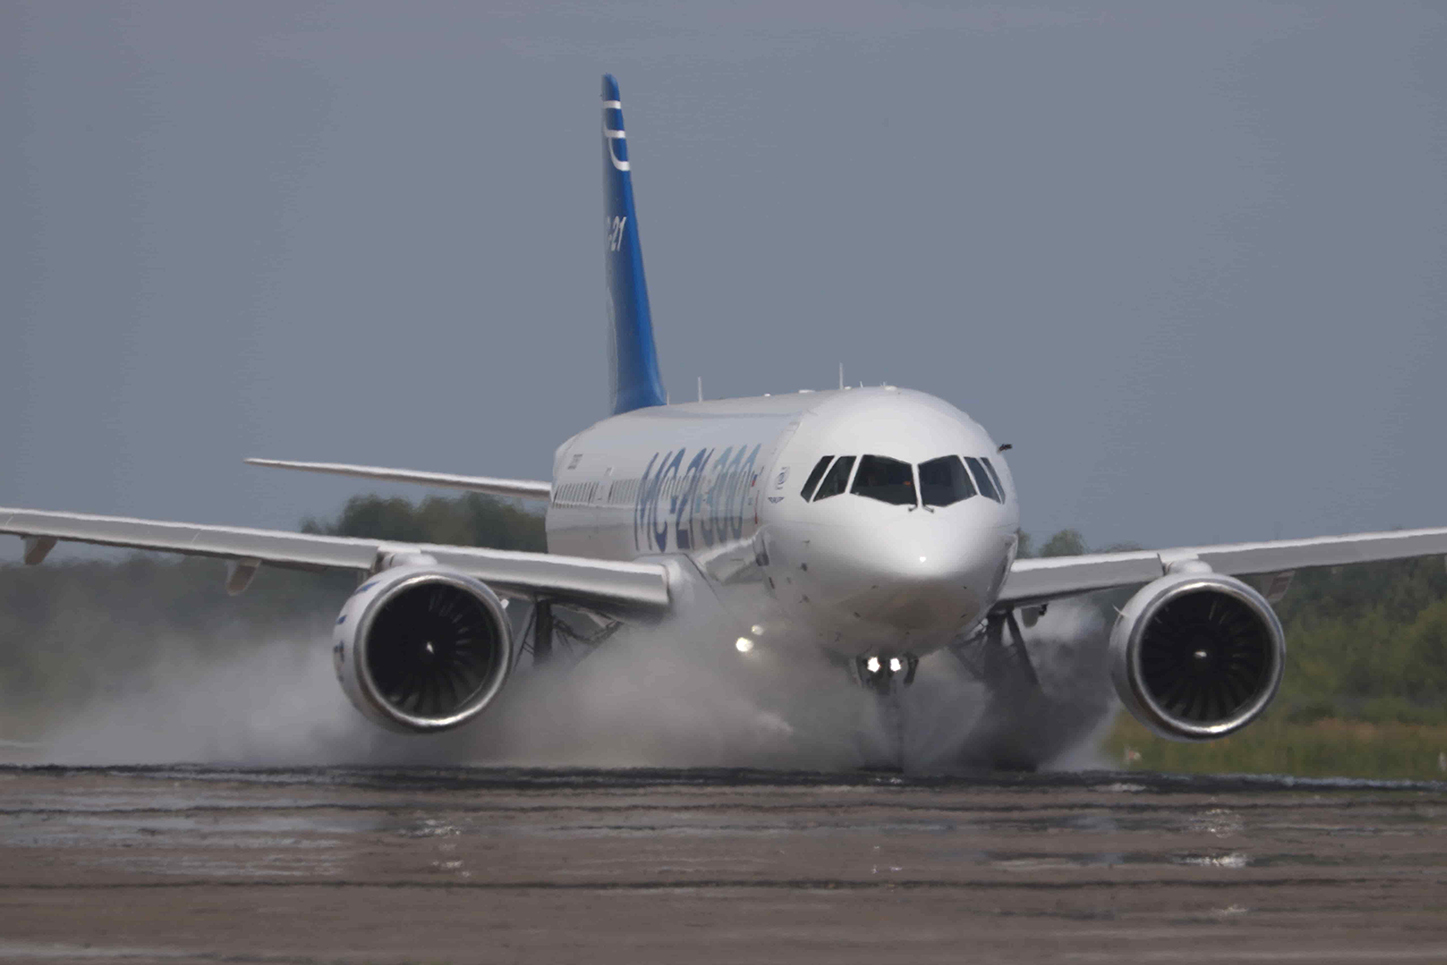 MC-21-300 aircraft engine water protection tests have been started